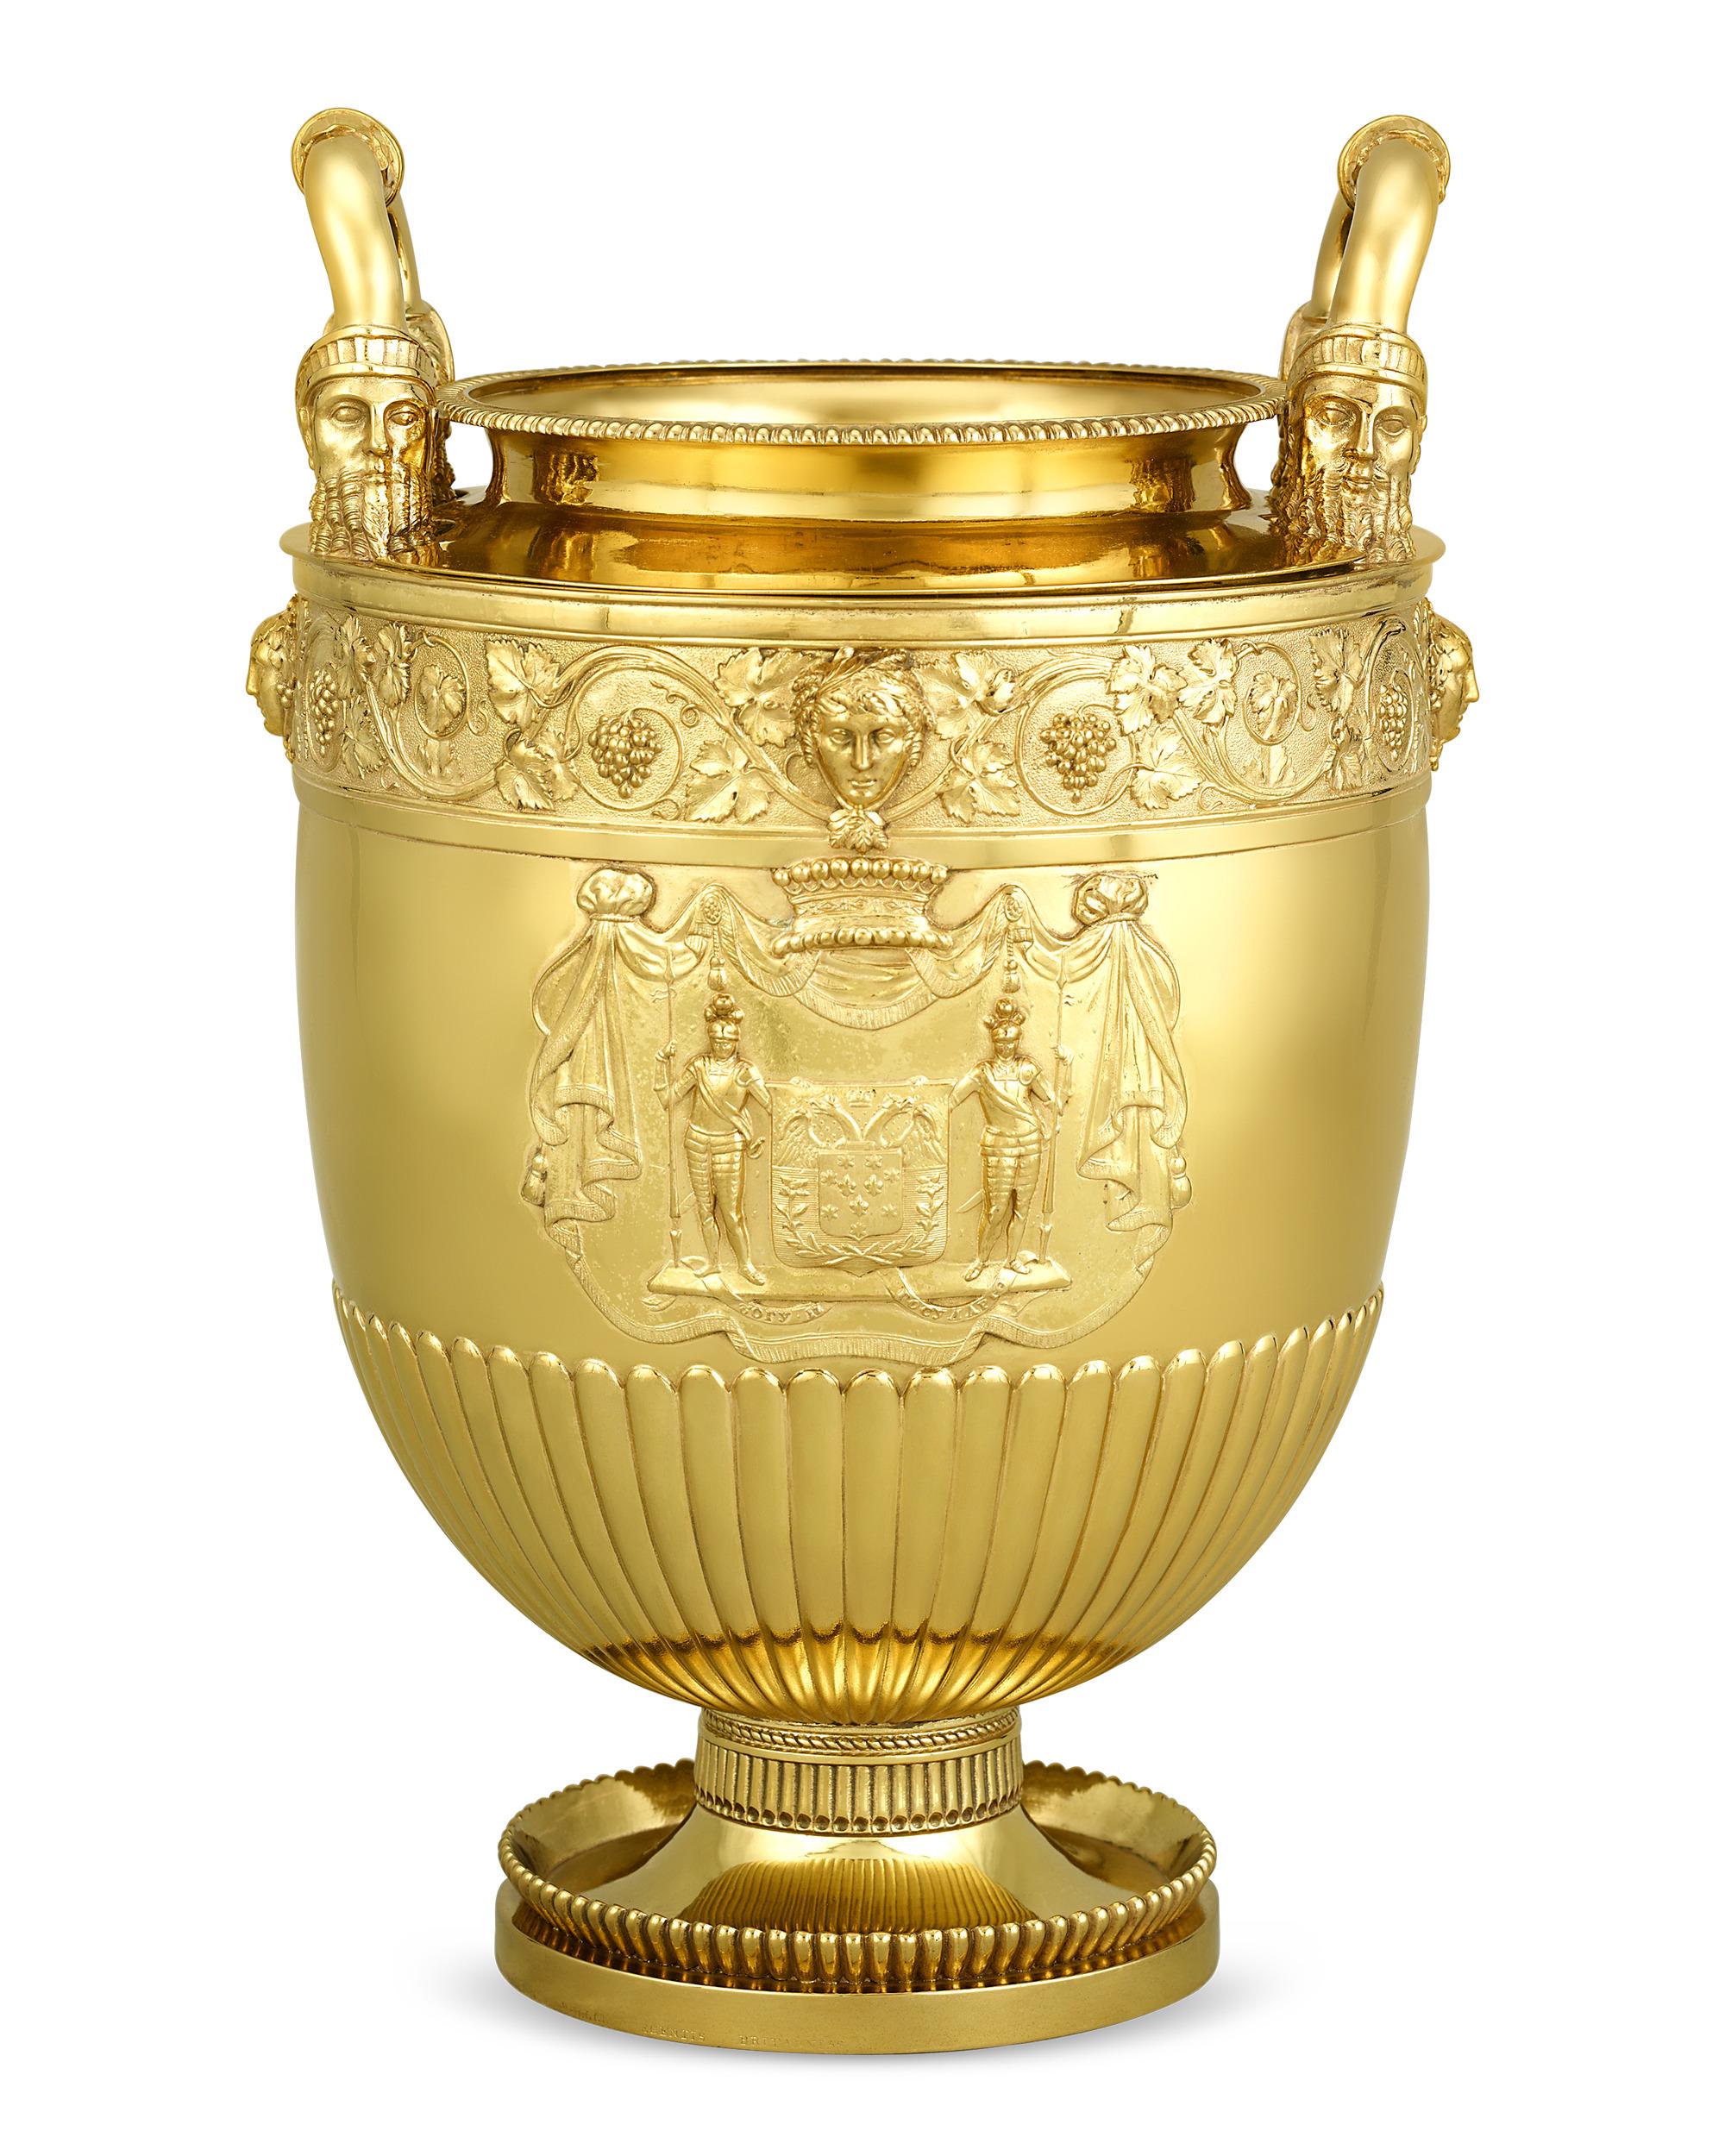 Neoclassical Paul Storr Silver-Gilt Wine Coolers